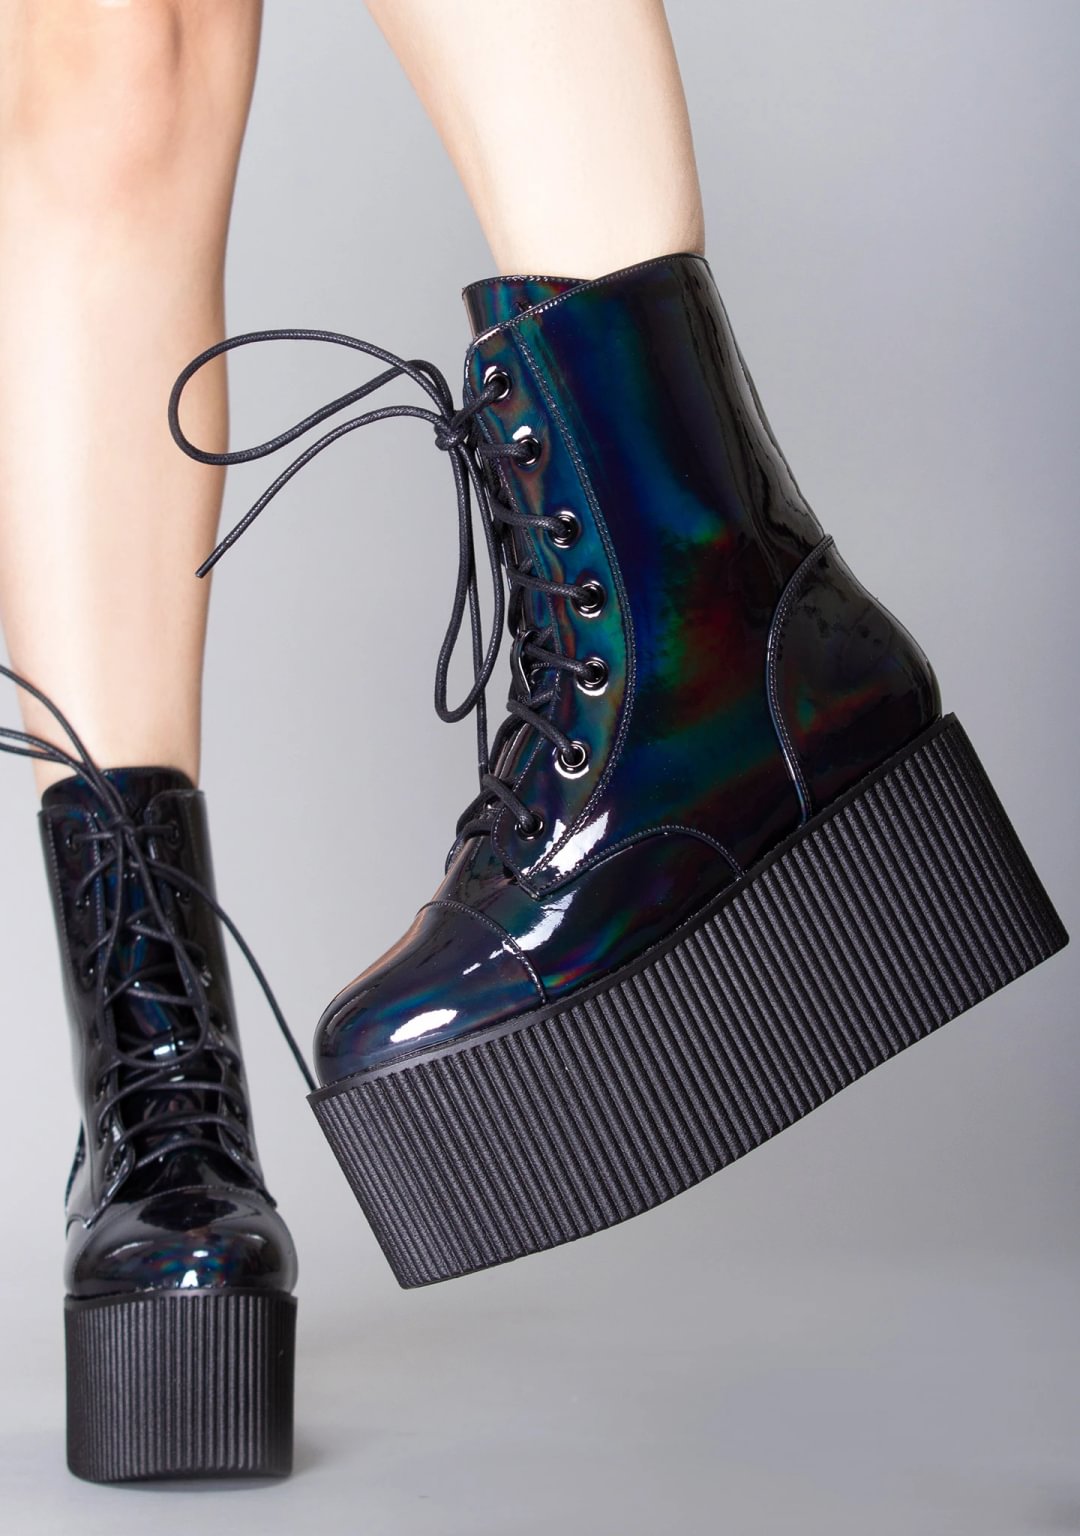 Kaos Mid Platform Boots in Holographic Black